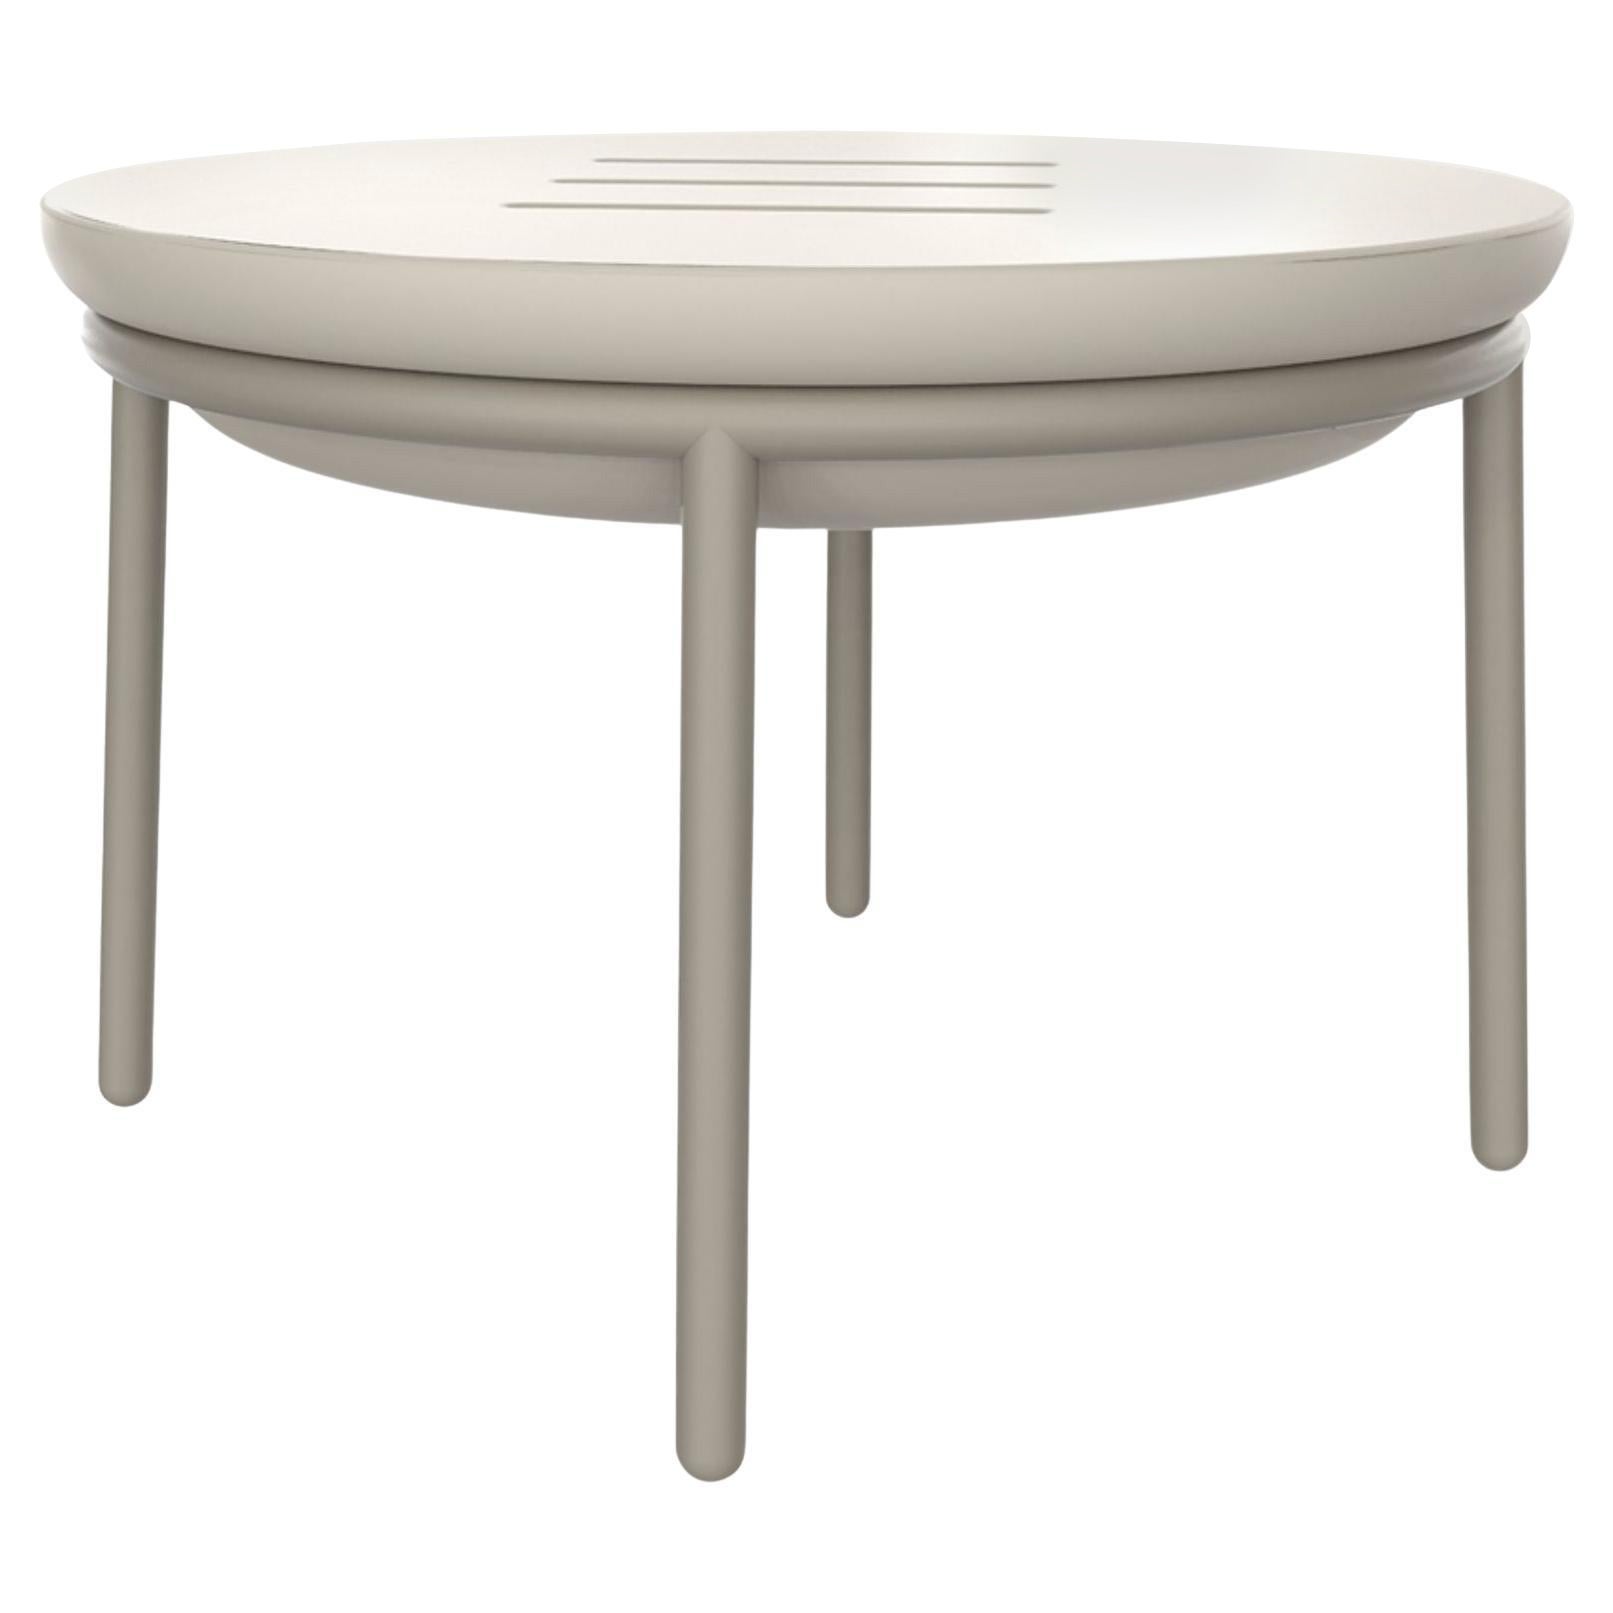 Lace Cream 60 Low Table by Mowee